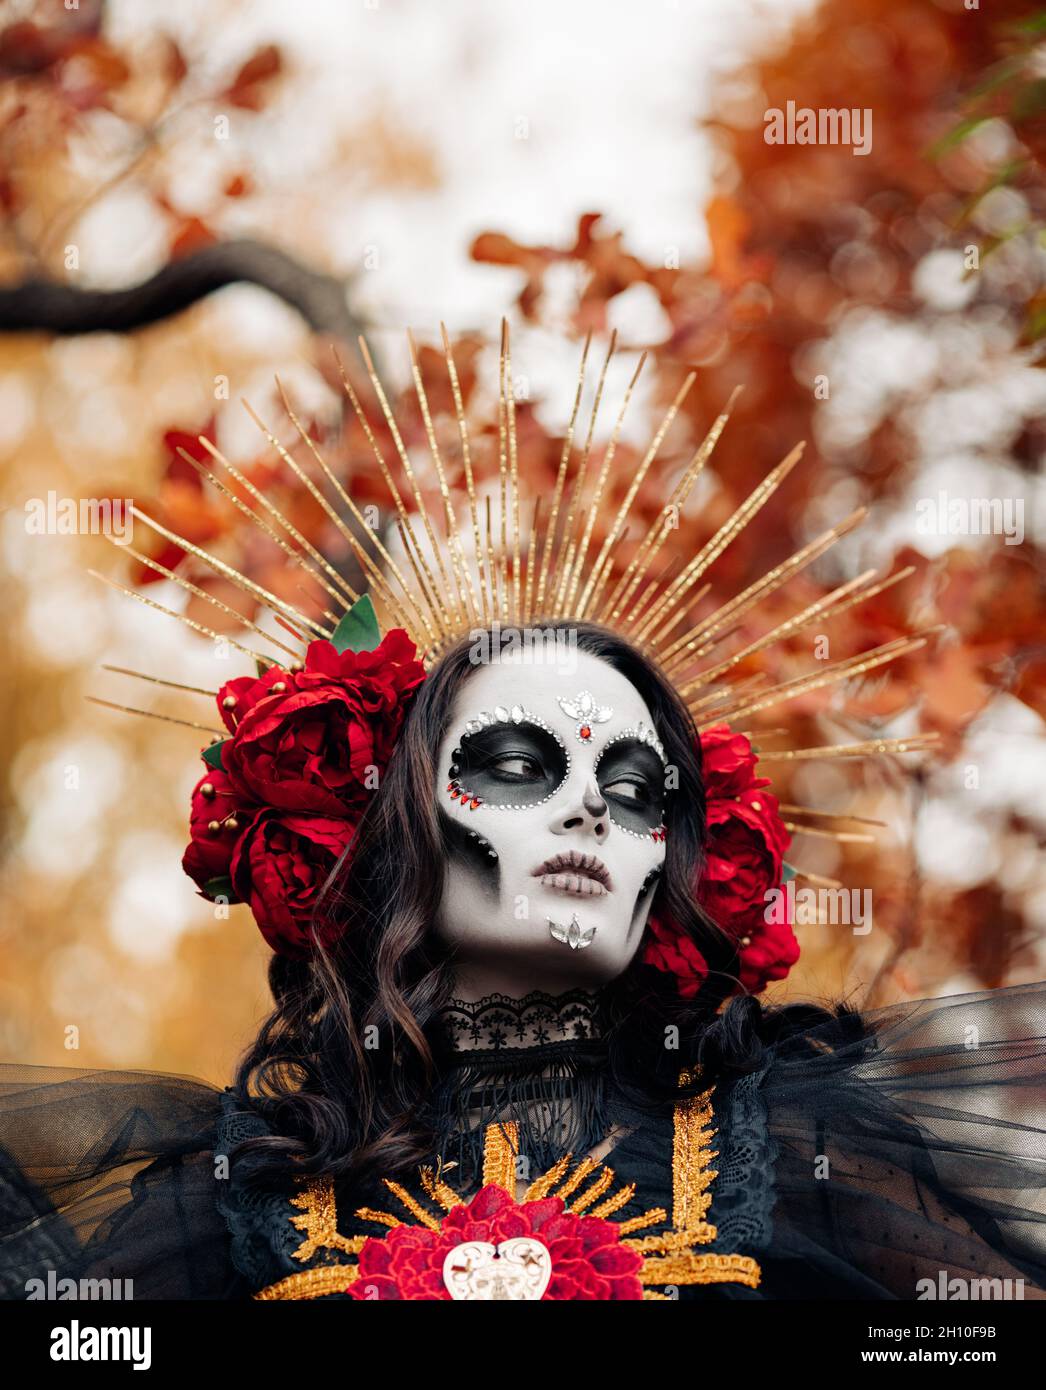 Portrait of young woman with sugar skull makeup and red roses dressed in  black costume of death as Santa Muerte against background of autumn leaves  in Stock Photo - Alamy